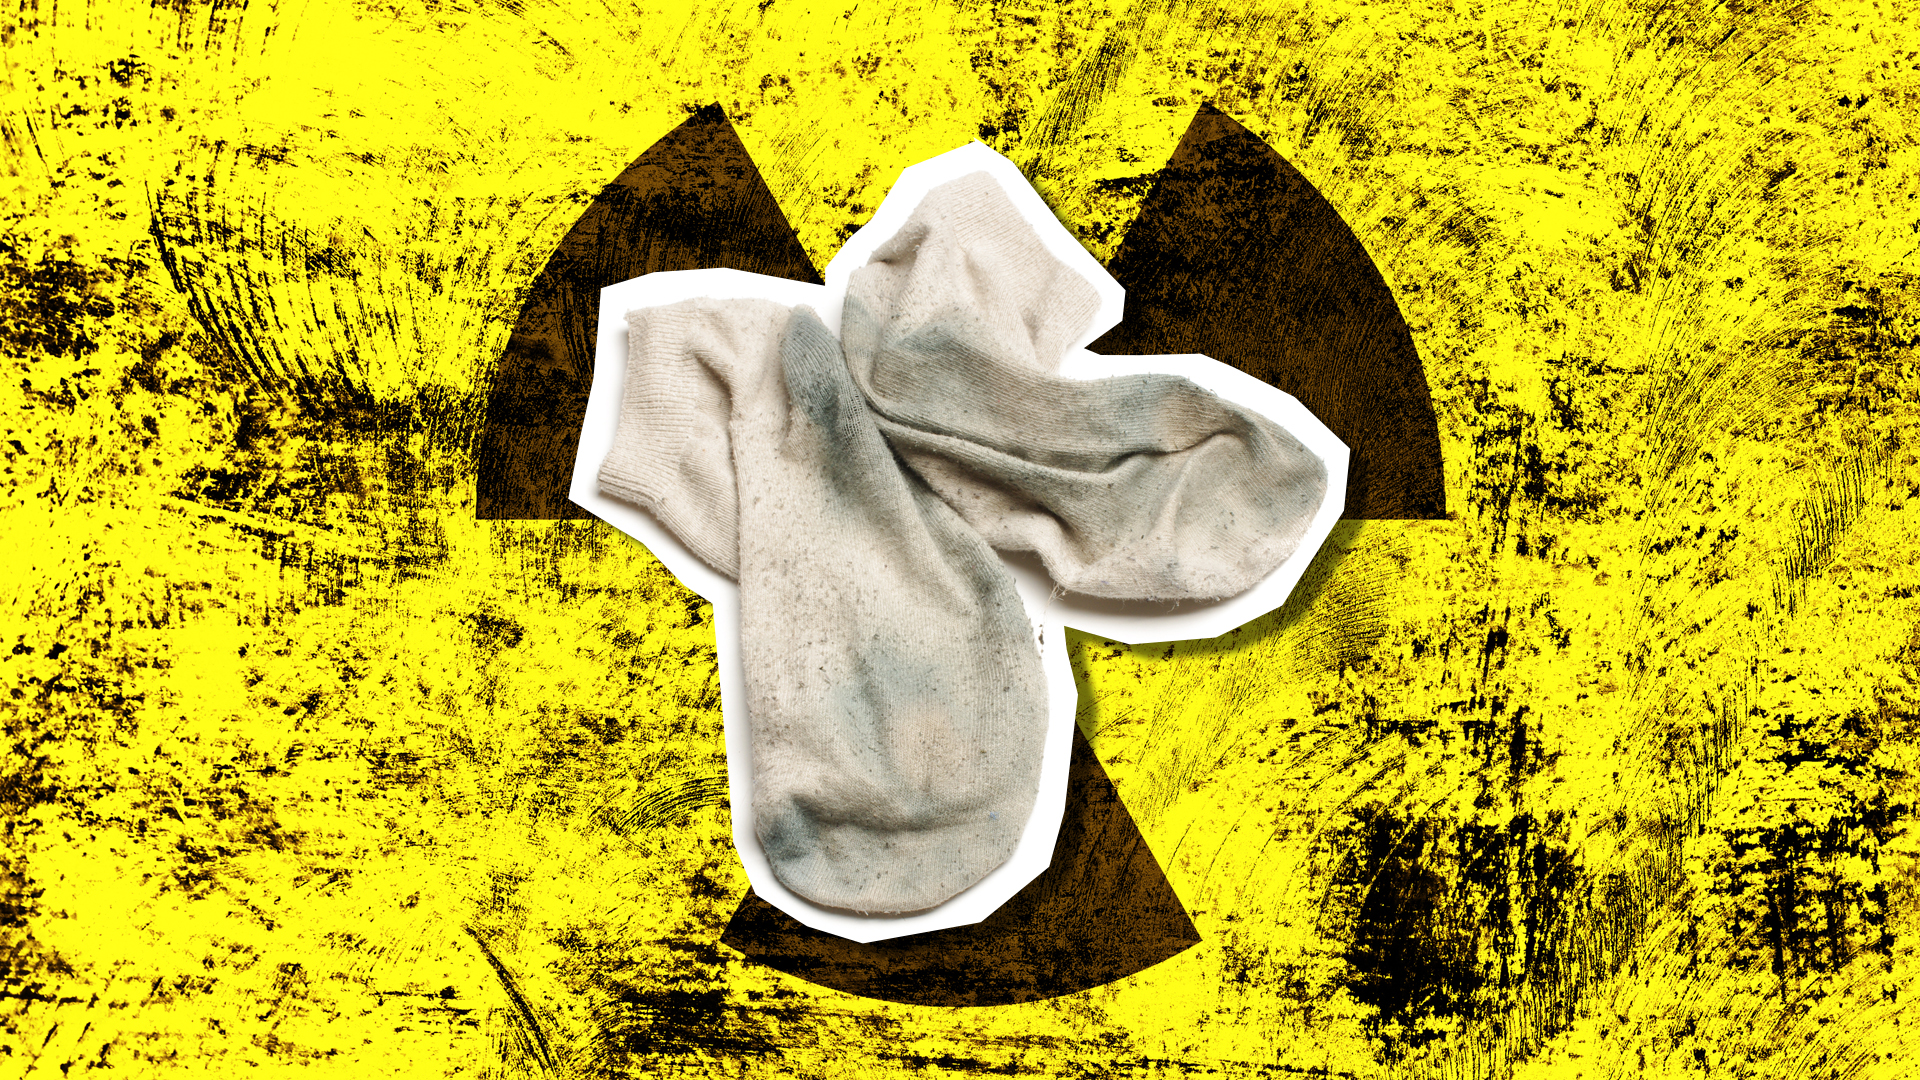 A pair of dirty socks against a radioactive background